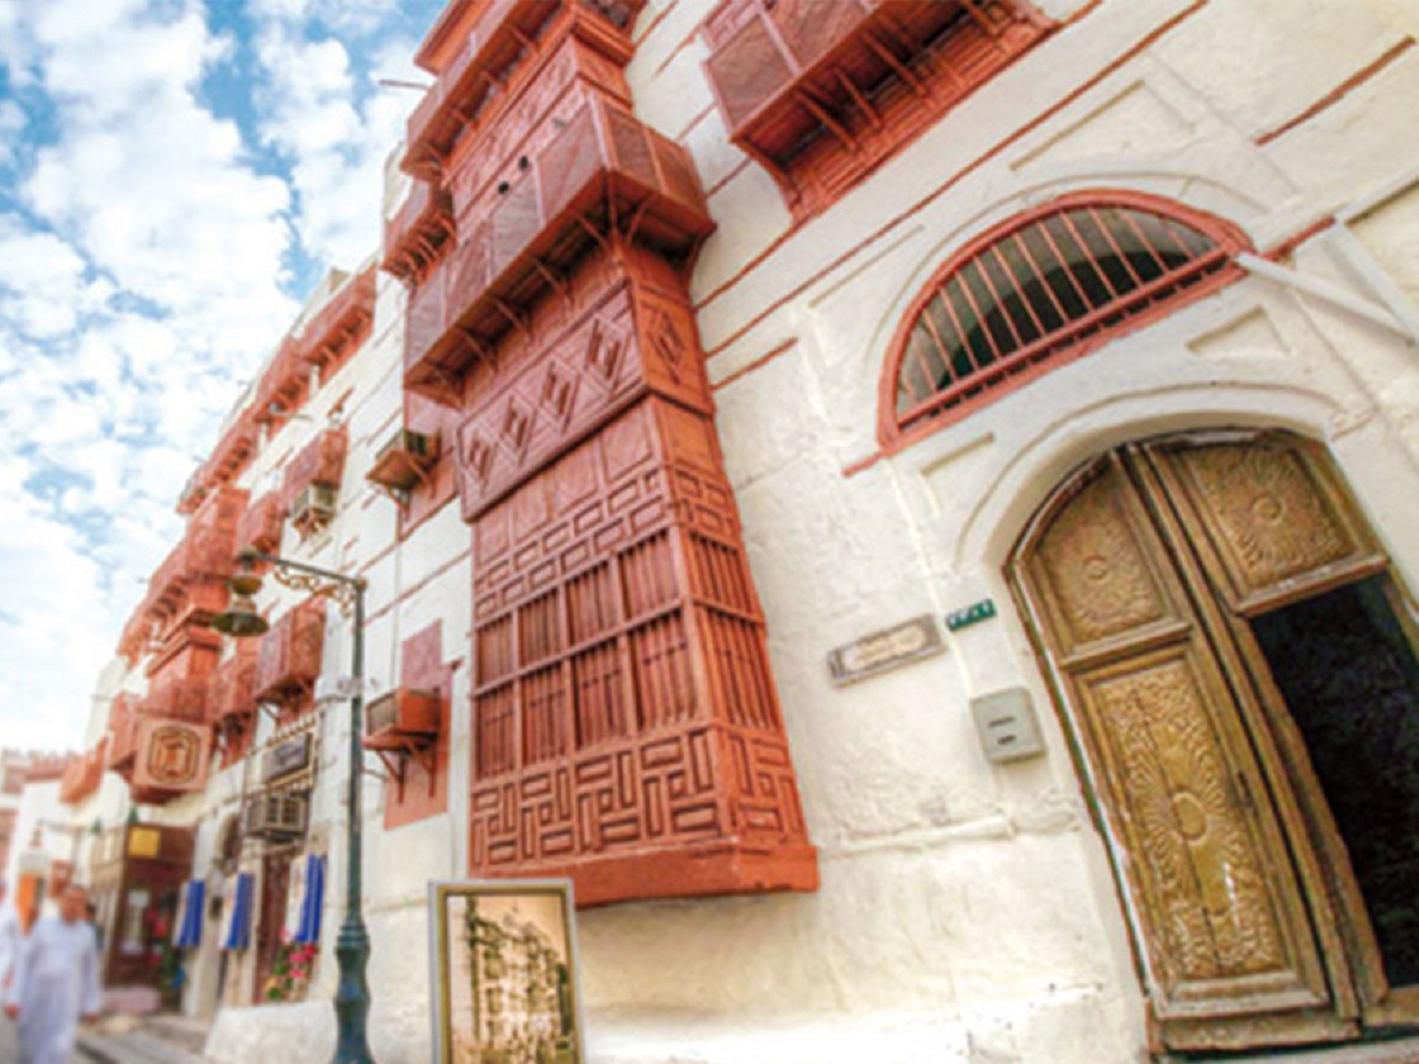 Crowne Plaza Jeddah Hotel is located in the heart of Jeddah, in Al Balad, which is only five minutes away. This  offers you the chance to explore the old districts and enjoy the beauty of their authentic architecture.